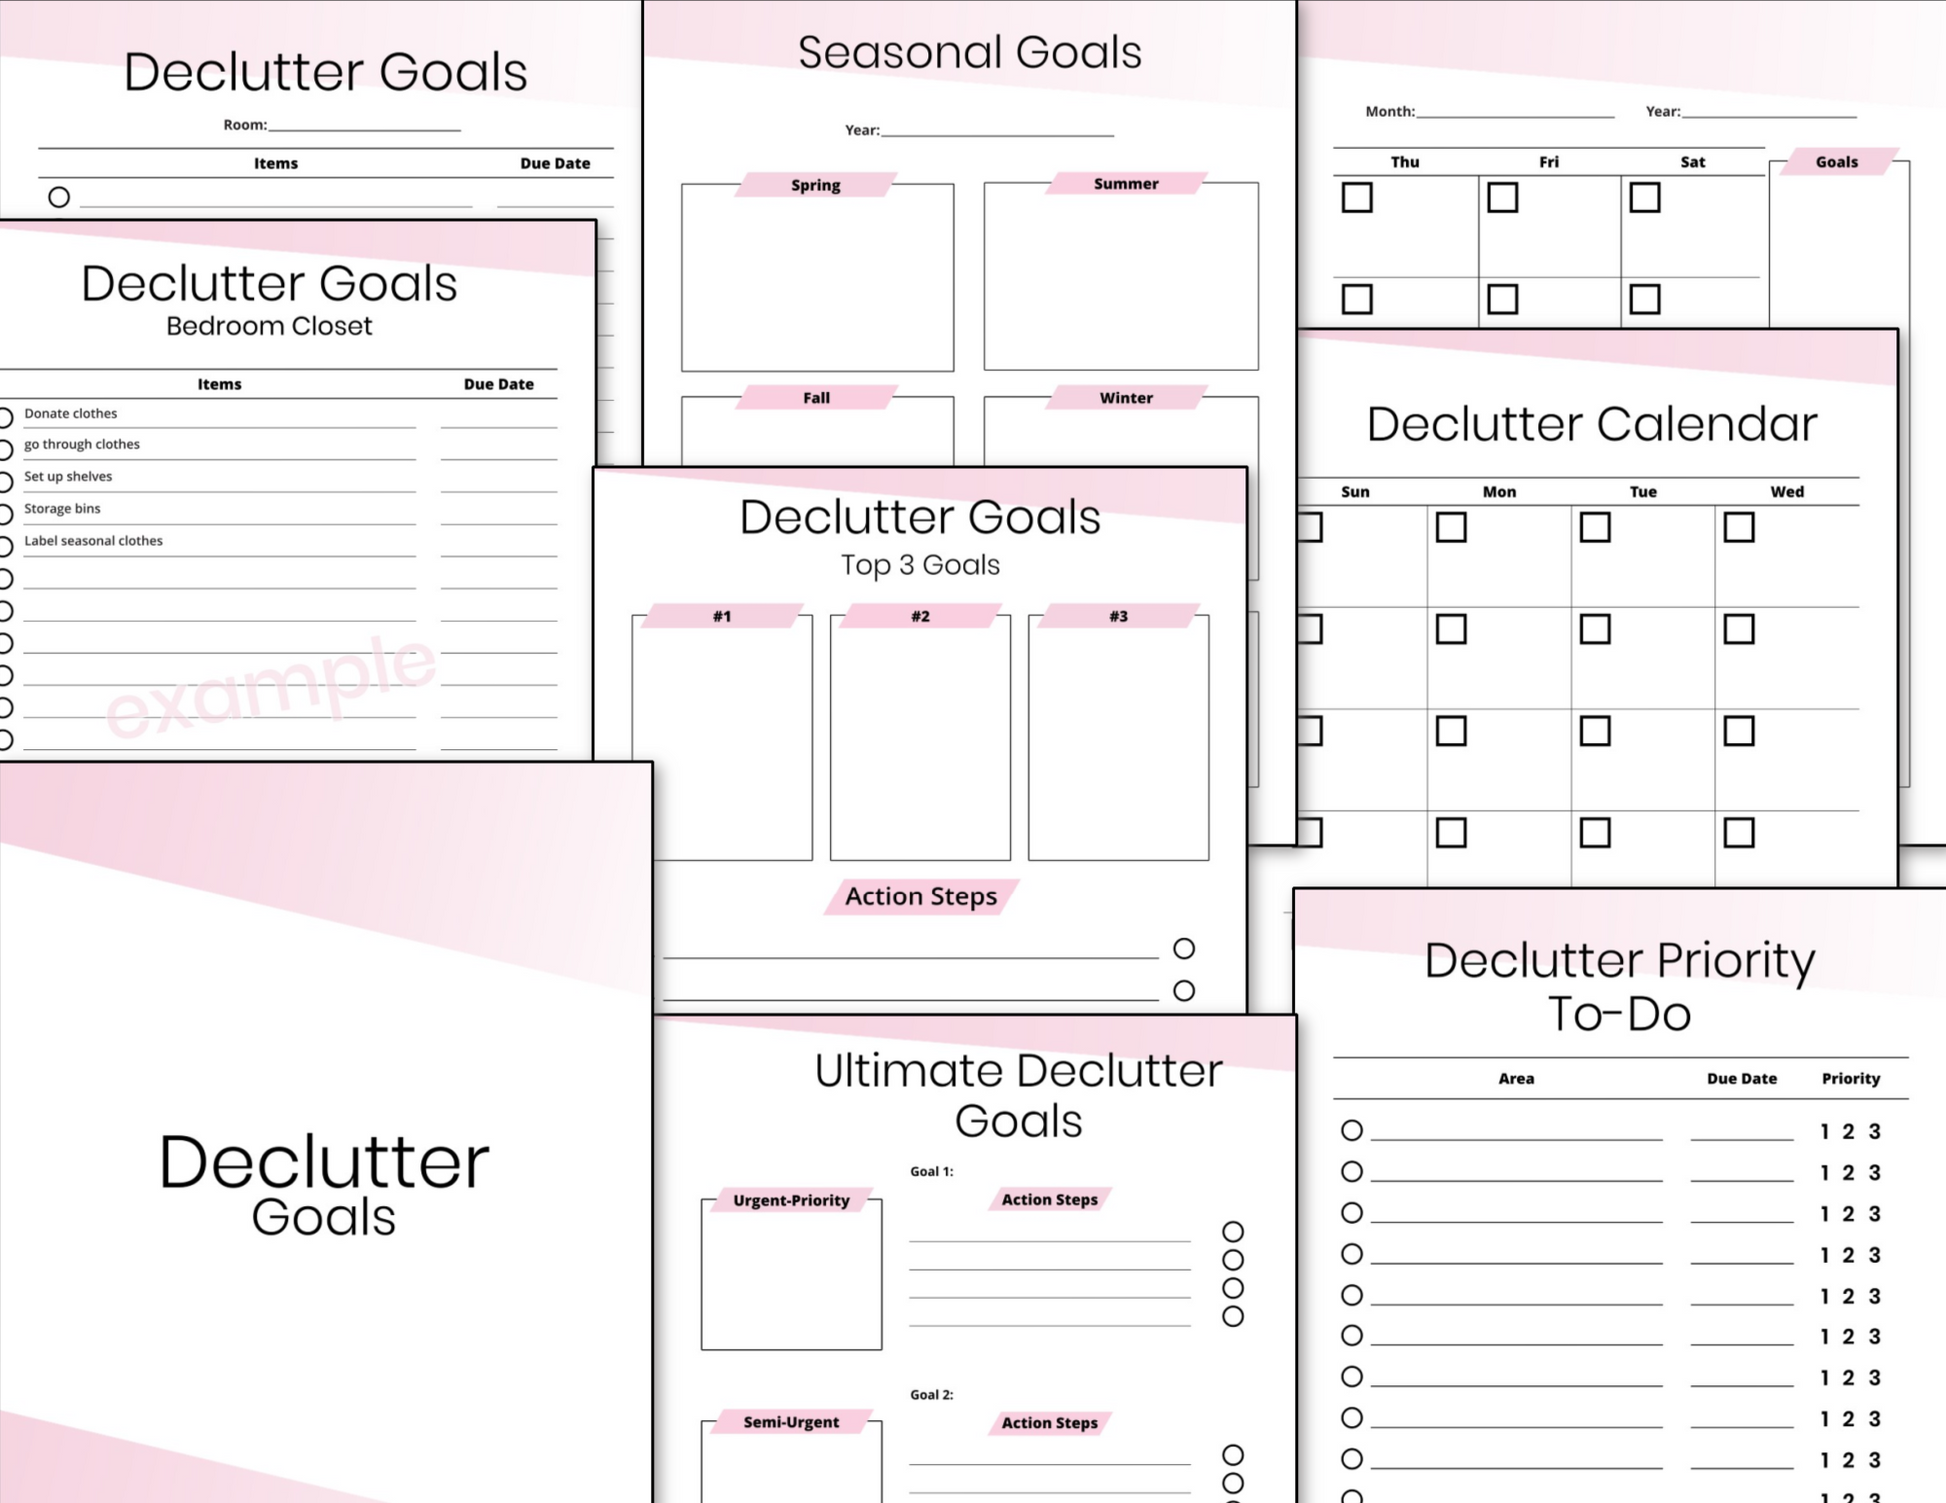 Various printable Declutter Binder Fillable - Pink worksheets in shades of pink and gray, featuring sections to fill in goals, action steps, and priorities from Organized 31 Shop.